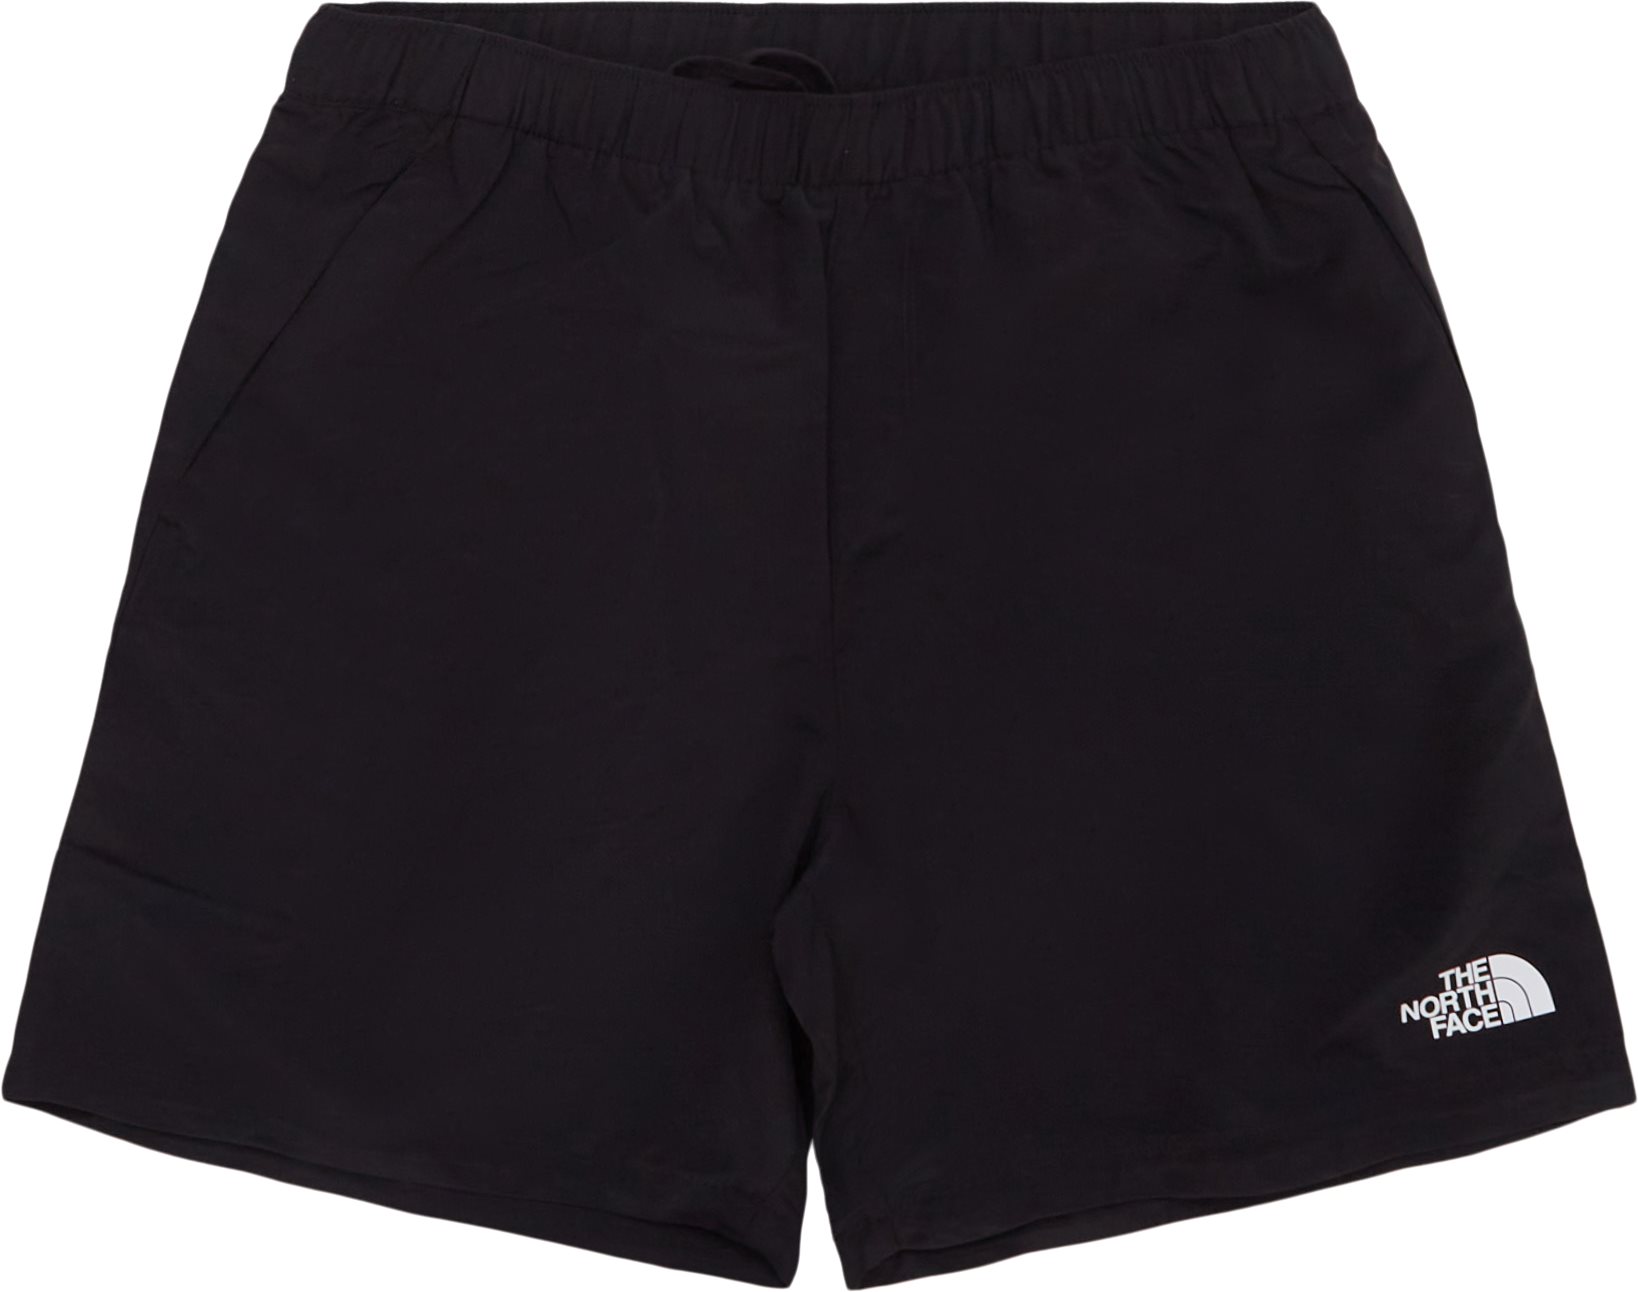 The North Face Shorts NEW WATER SHORTS NF0A5IG5 Black